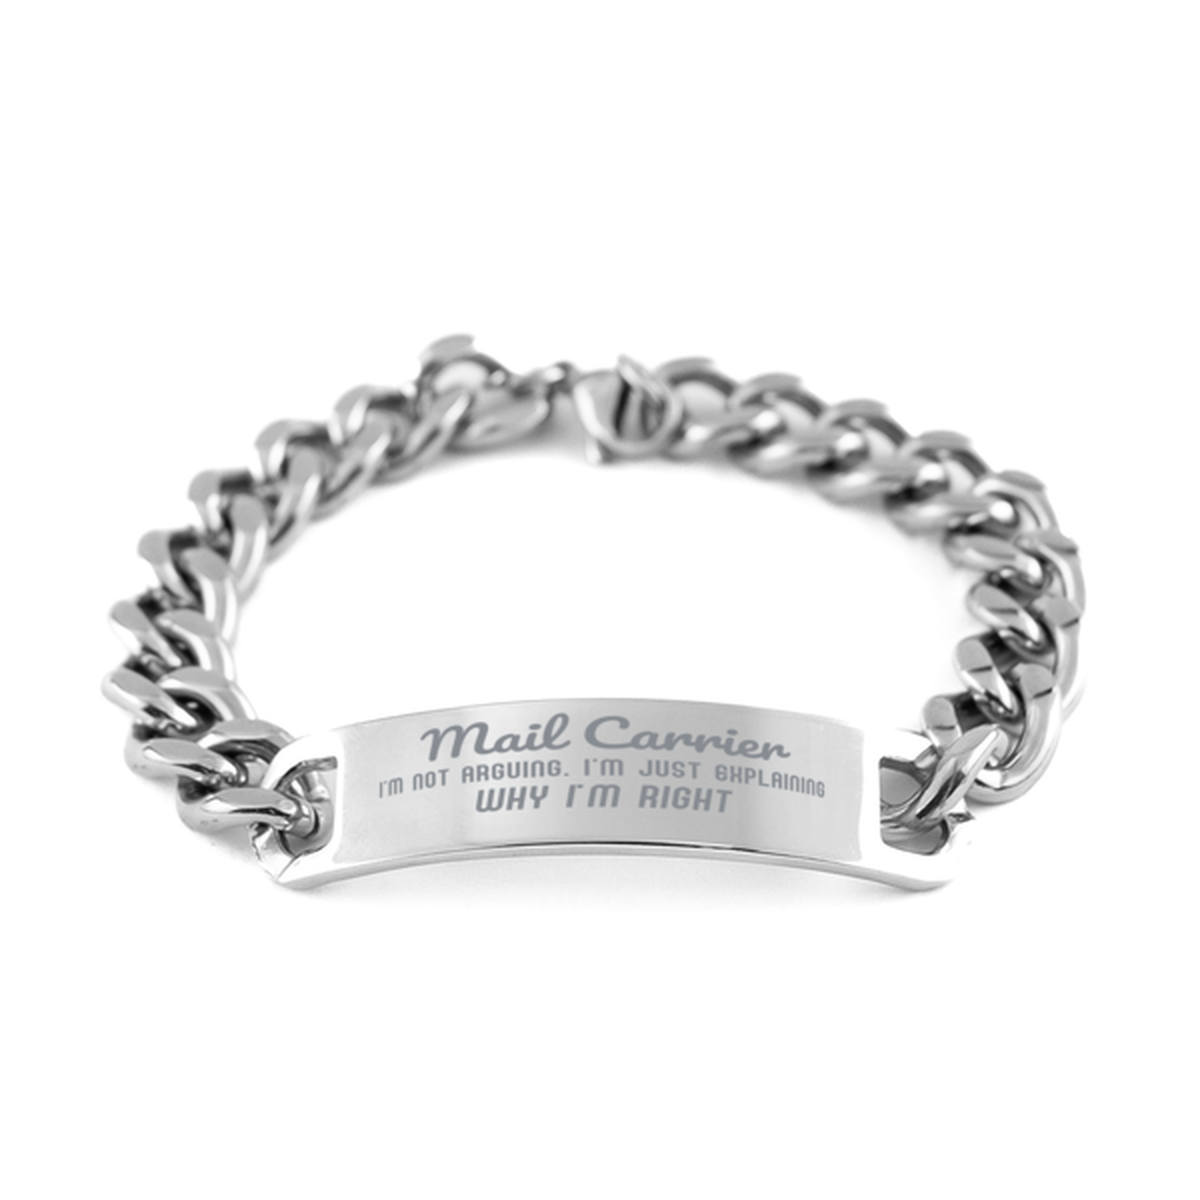 Mail Carrier I'm not Arguing. I'm Just Explaining Why I'm RIGHT Cuban Chain Stainless Steel Bracelet, Graduation Birthday Christmas Mail Carrier Gifts For Mail Carrier Funny Saying Quote Present for Men Women Coworker